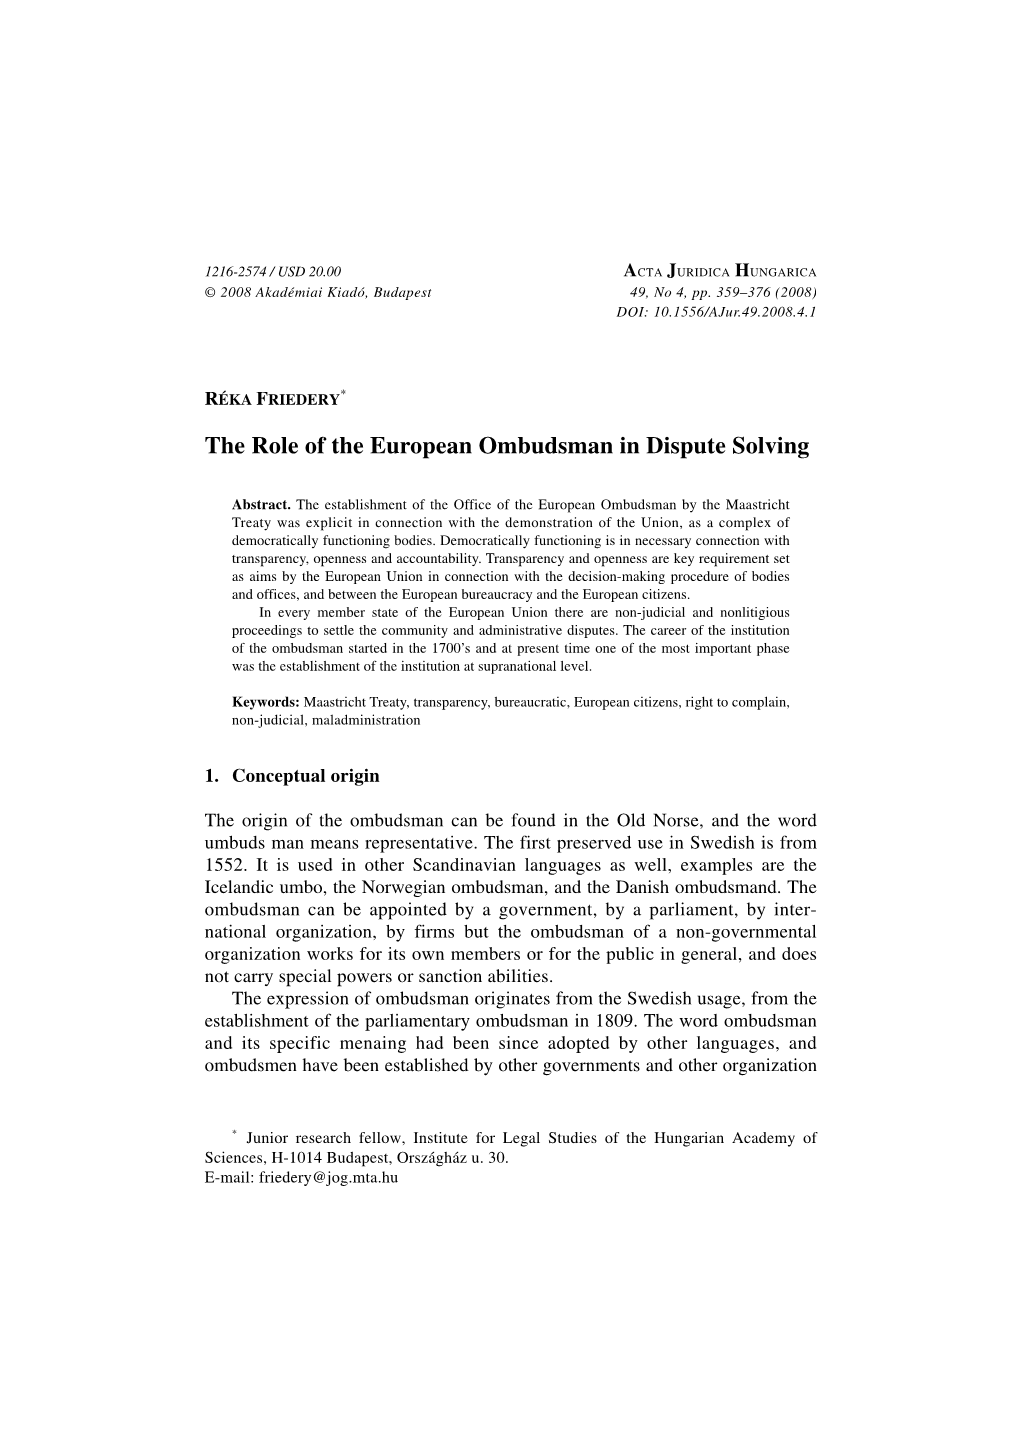 The Role of the European Ombudsman in Dispute Solving